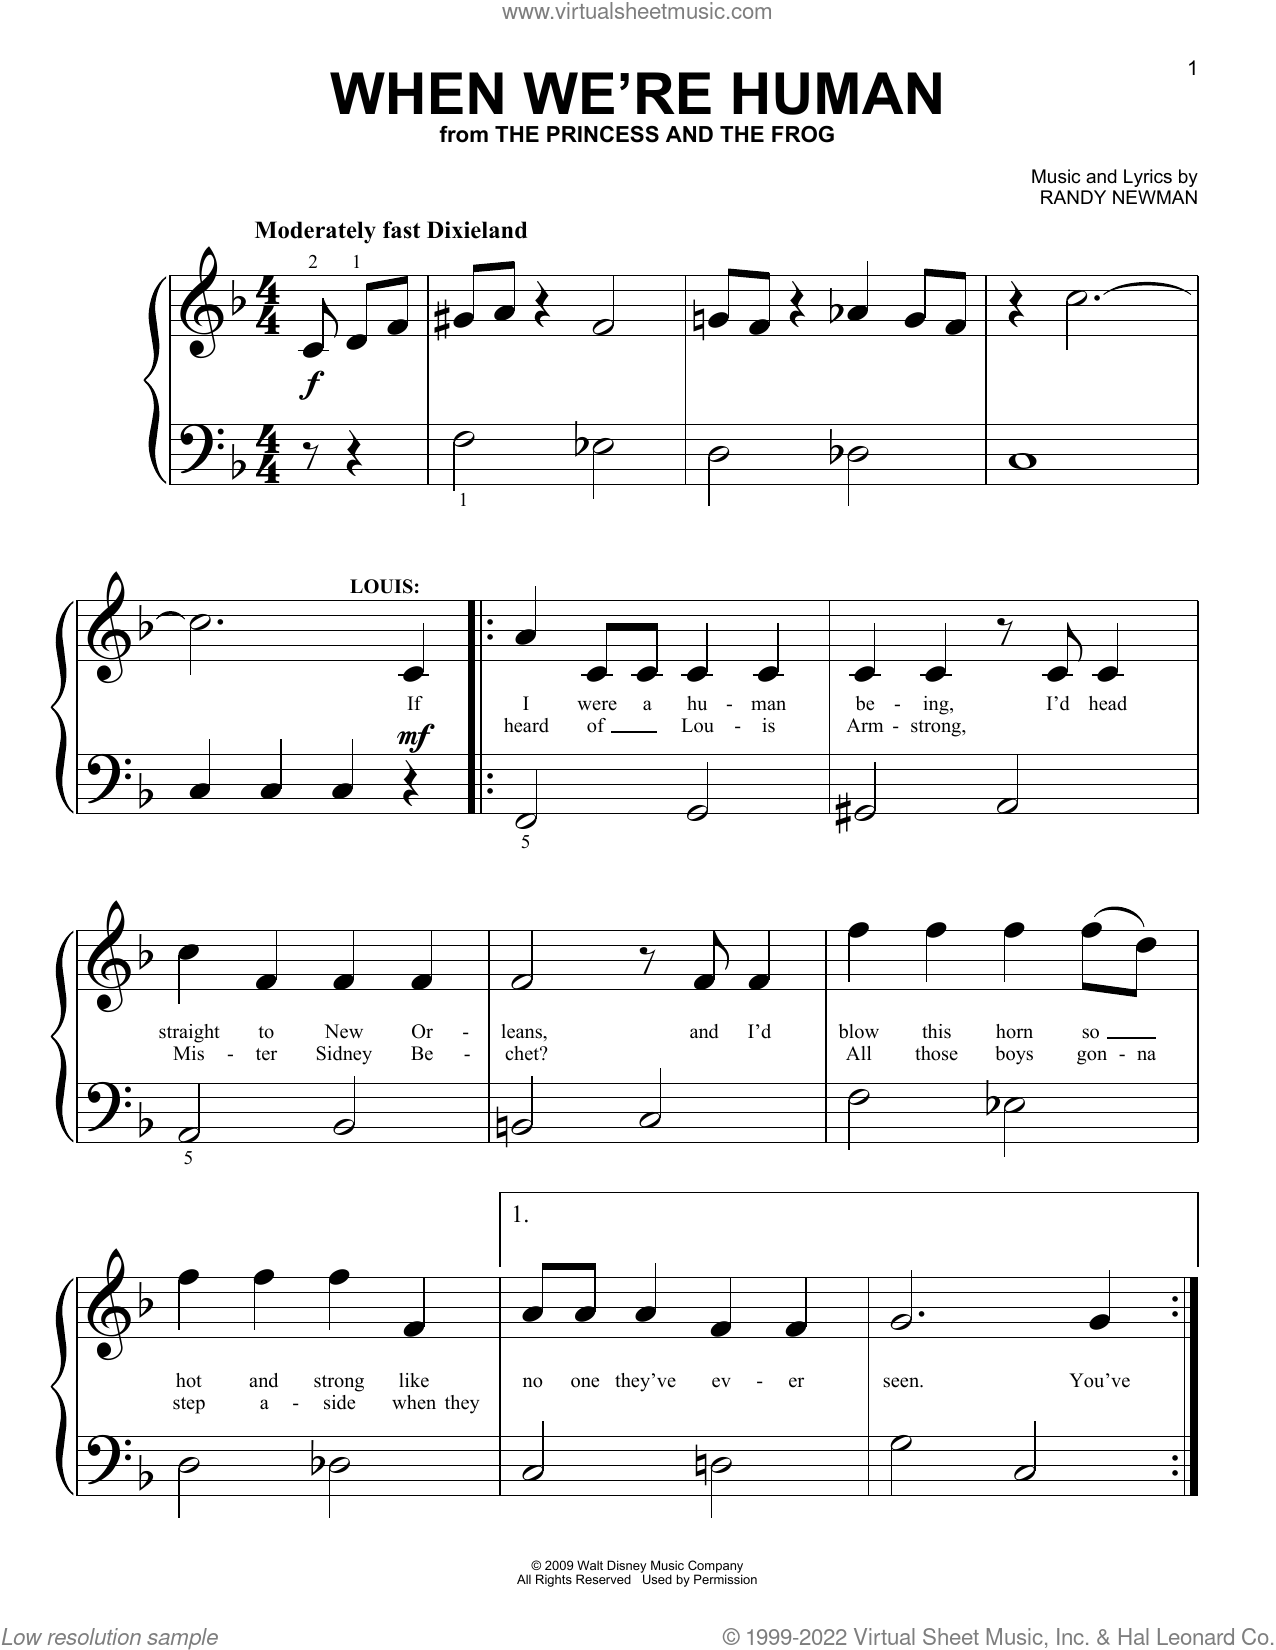 When We're Human (from The Princess And The Frog) sheet music for piano ...